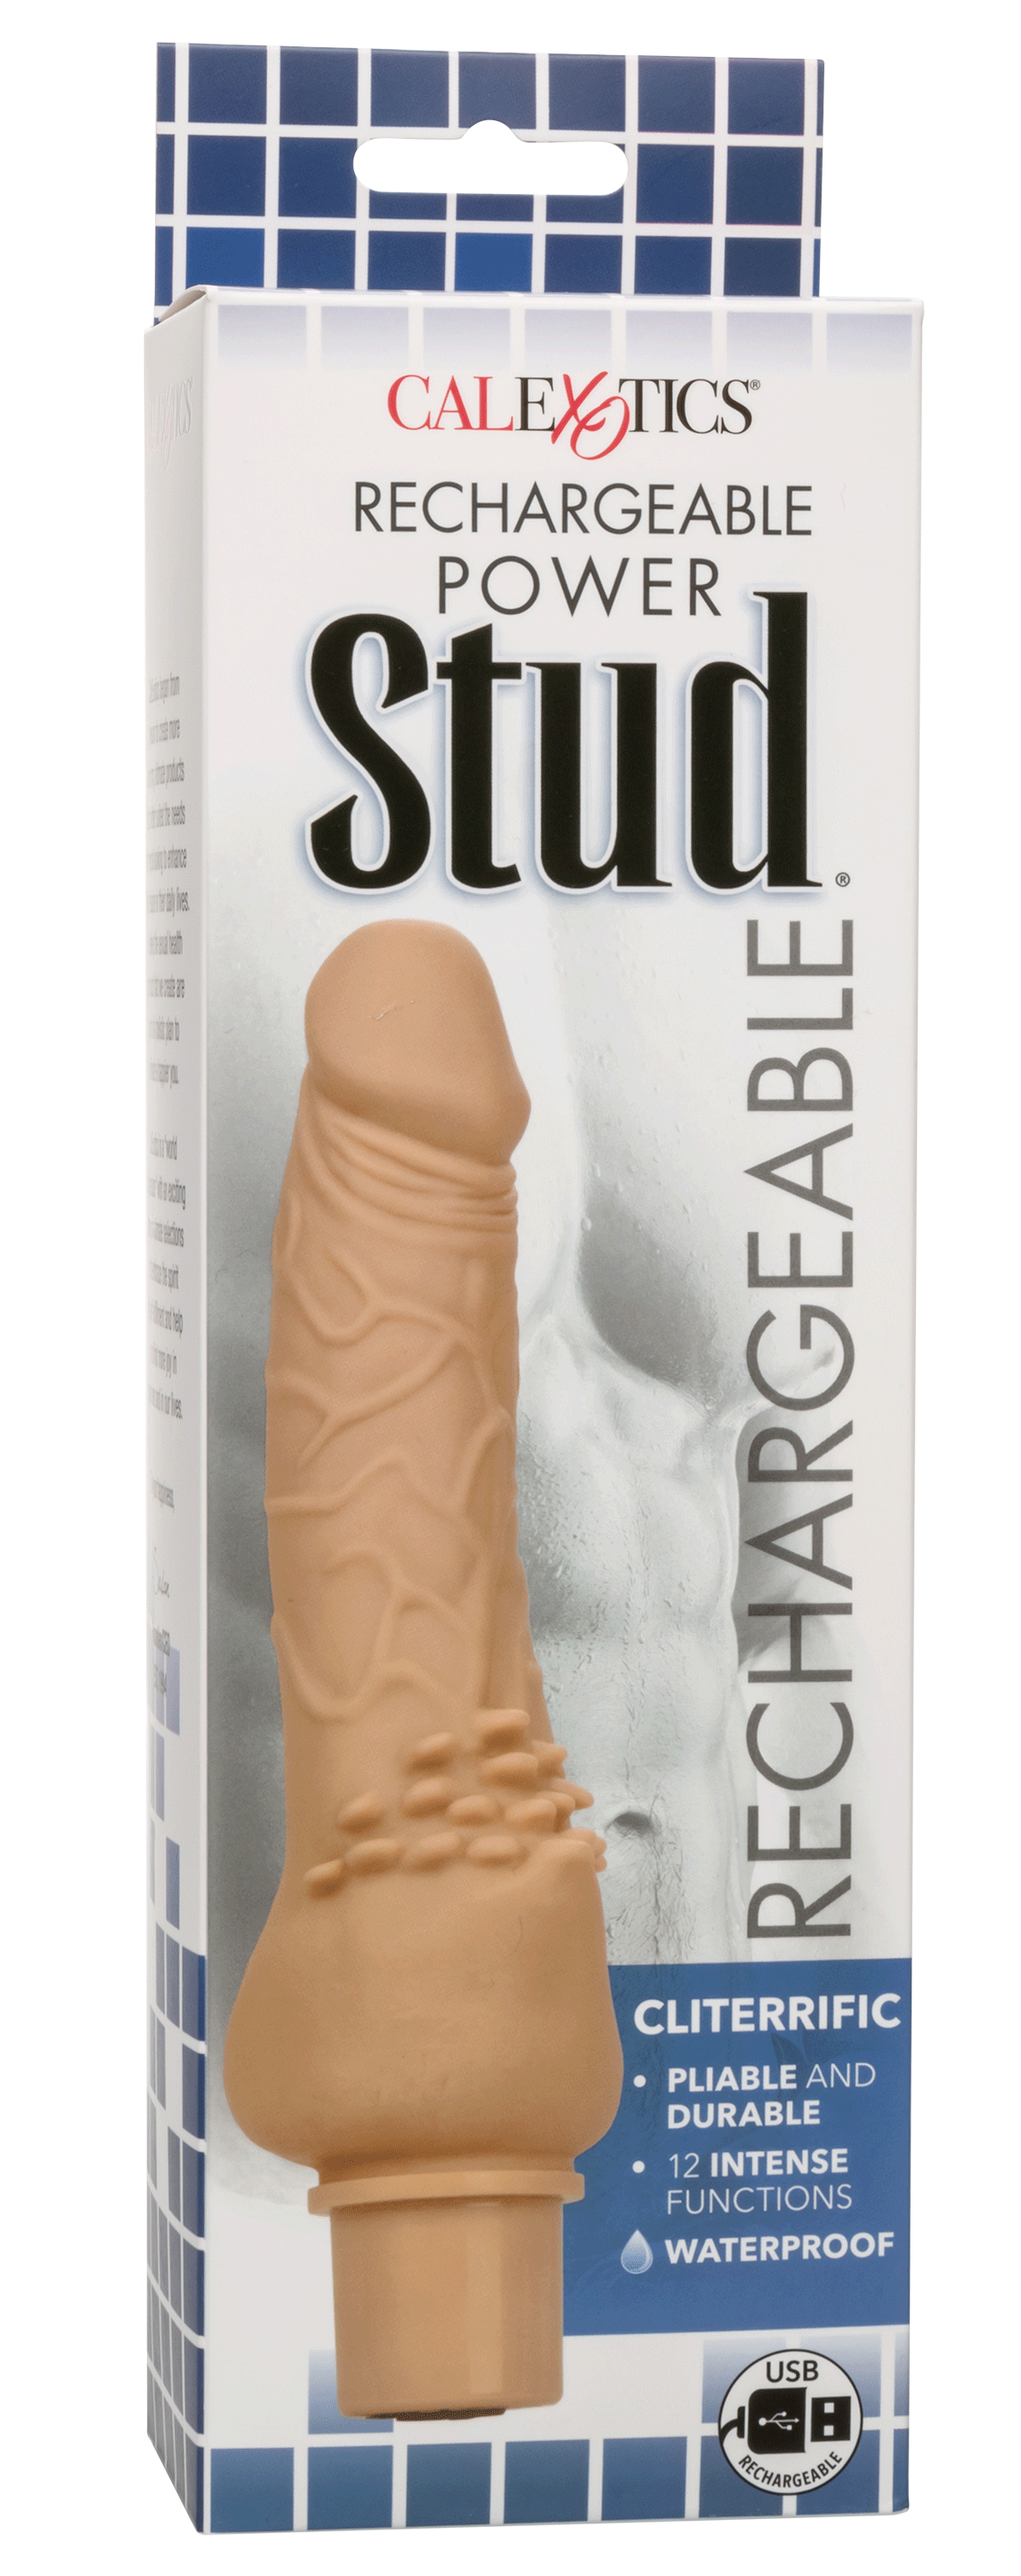 rechargeable power stud cliterrific ivory